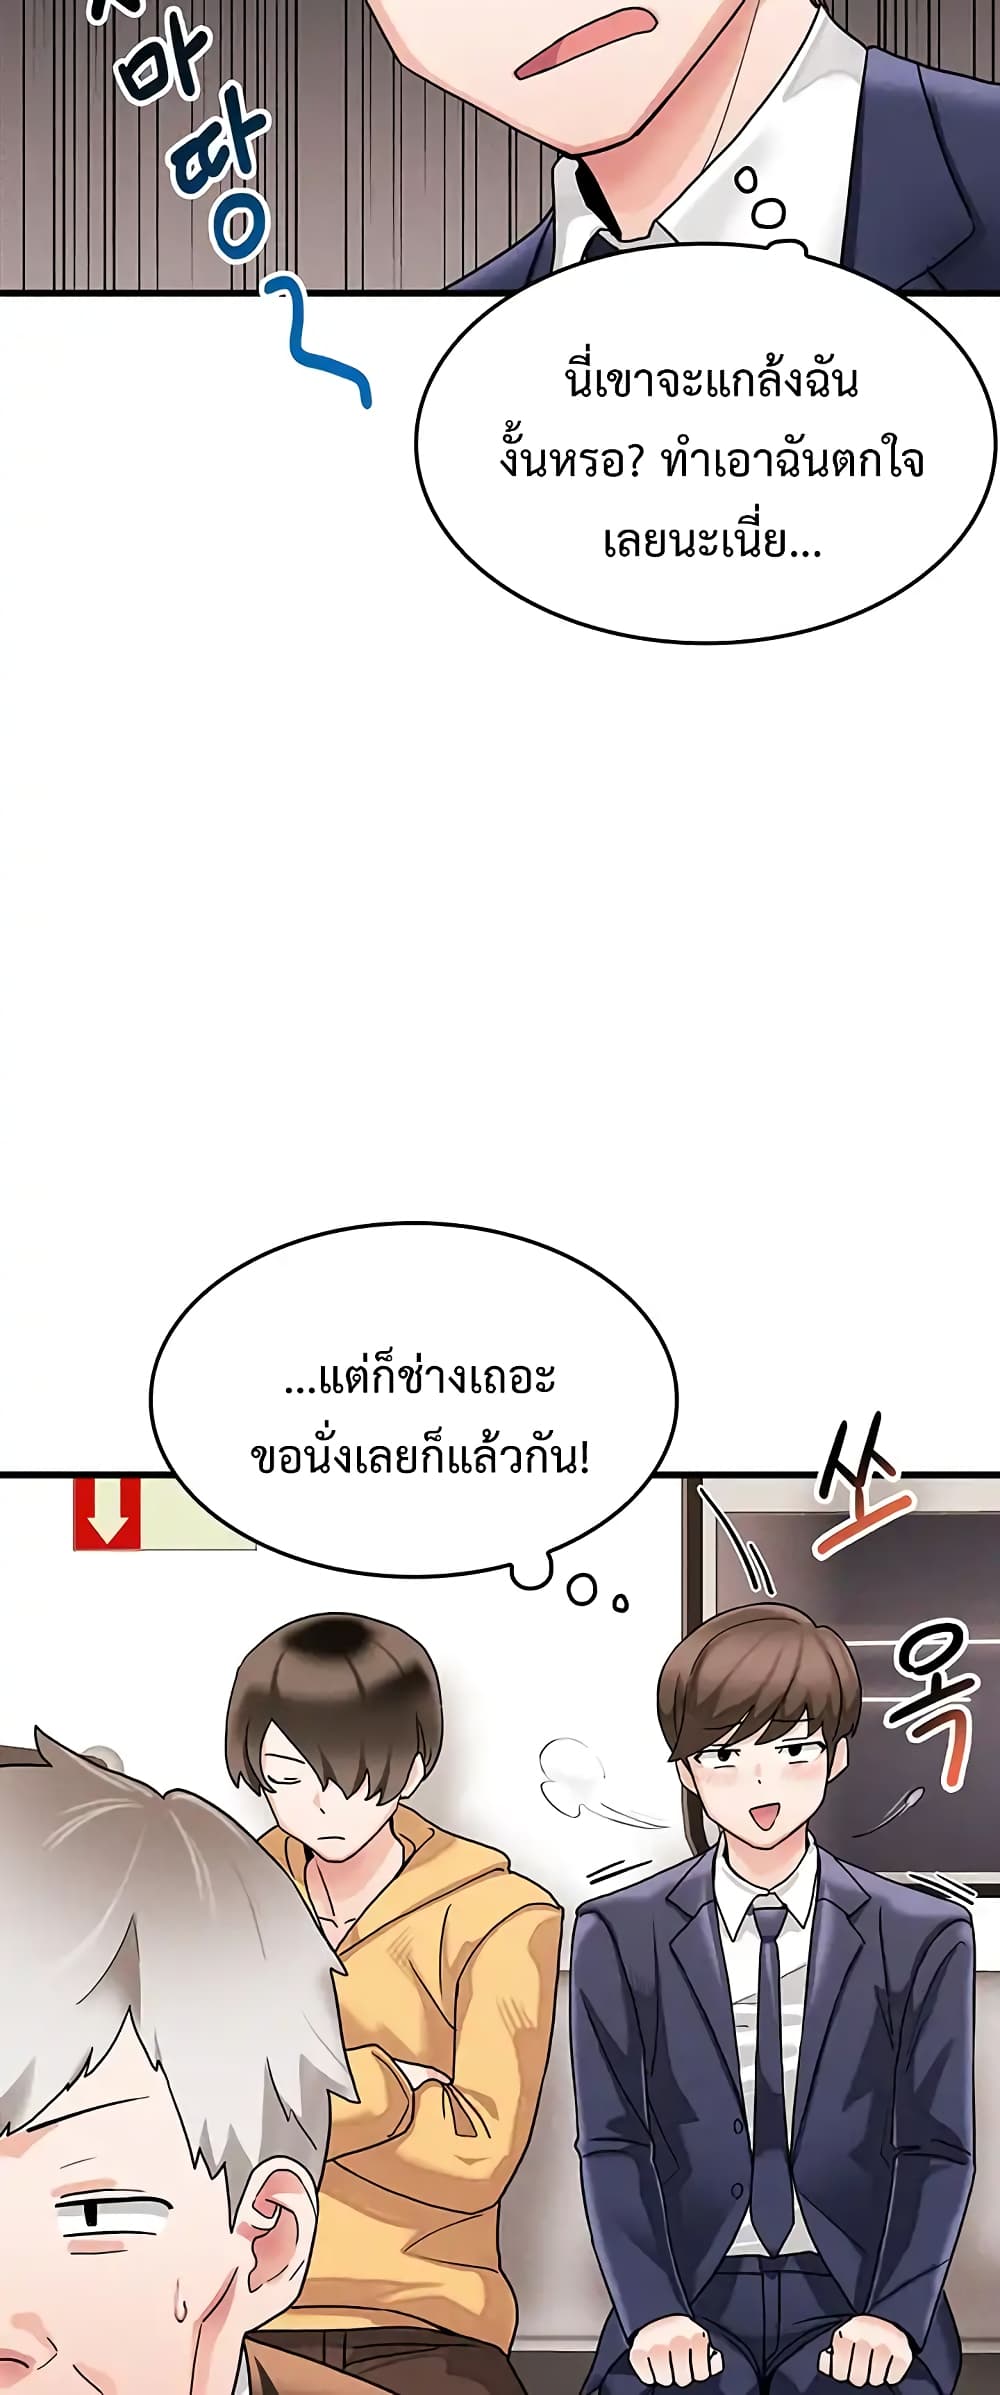 Relationship Reverse Button: Let’s Make Her Submissive 1 ภาพที่ 11